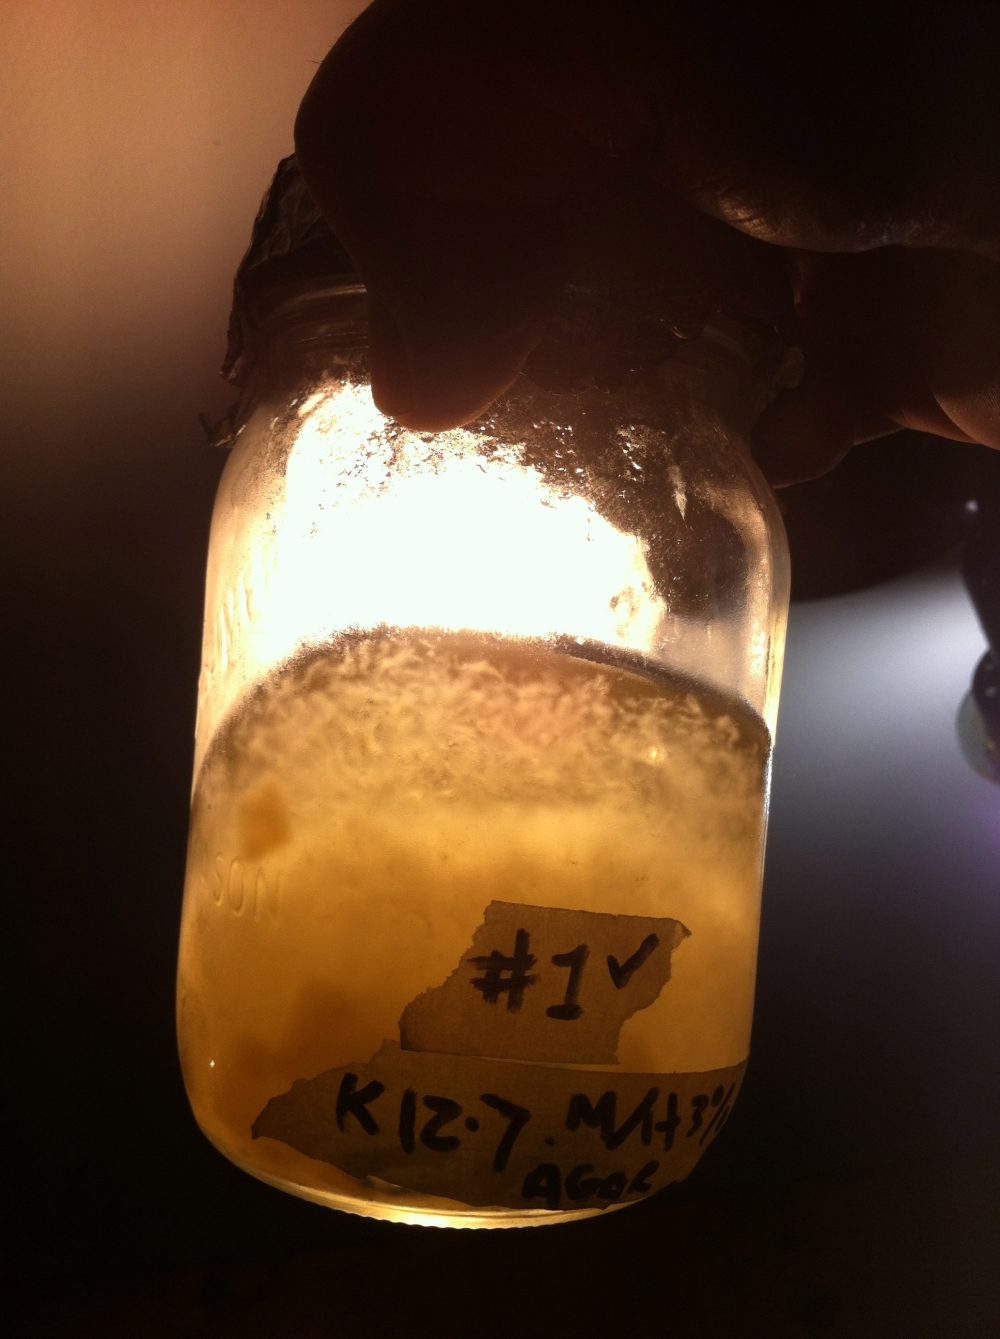 King Oyster colonized agar used to make liquid Culture